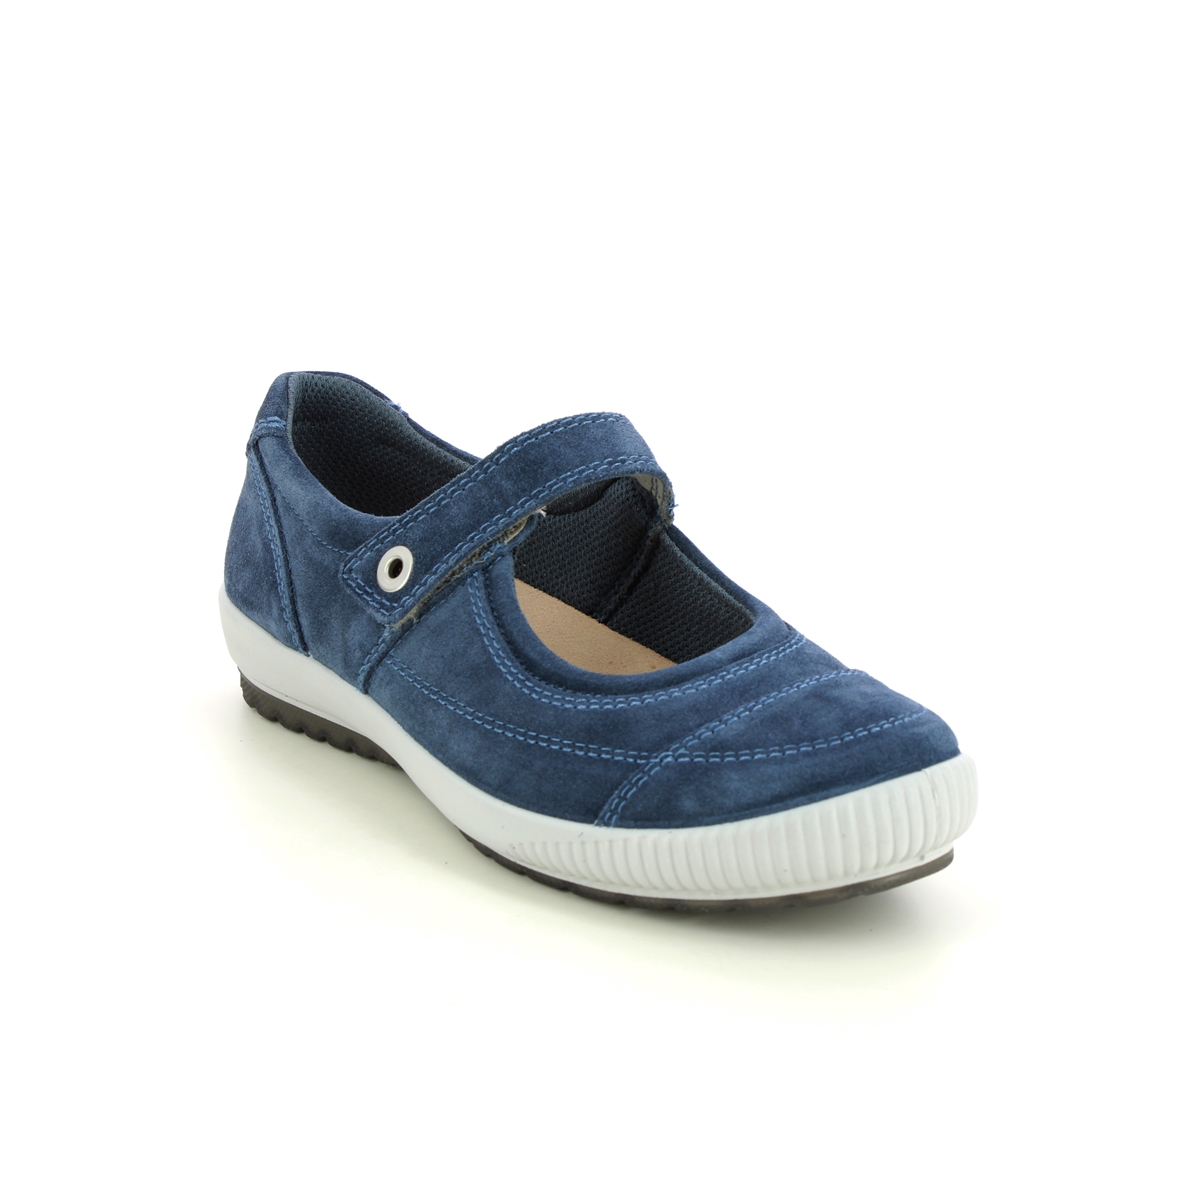 Legero Tanaro Bar Blue Suede Womens Mary Jane Shoes 0600822-8600 In Size 4 In Plain Blue Suede